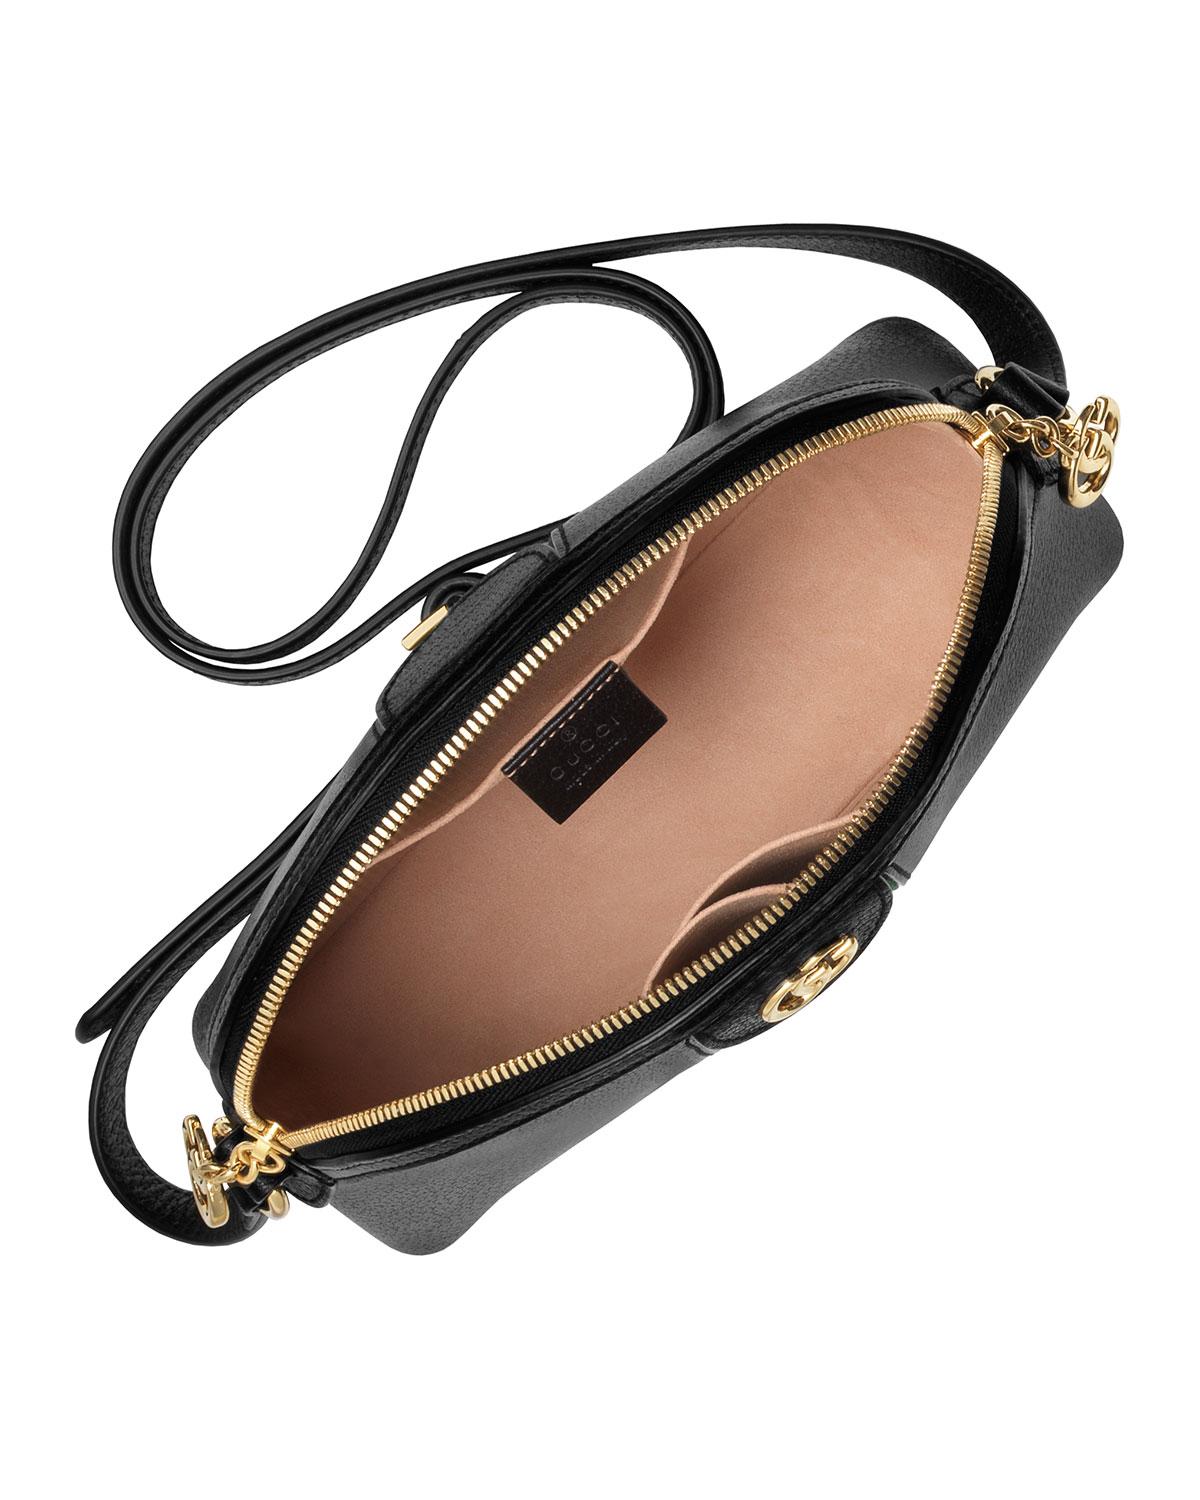 Gucci Ophidia Small Shoulder Bag in Black - Lyst